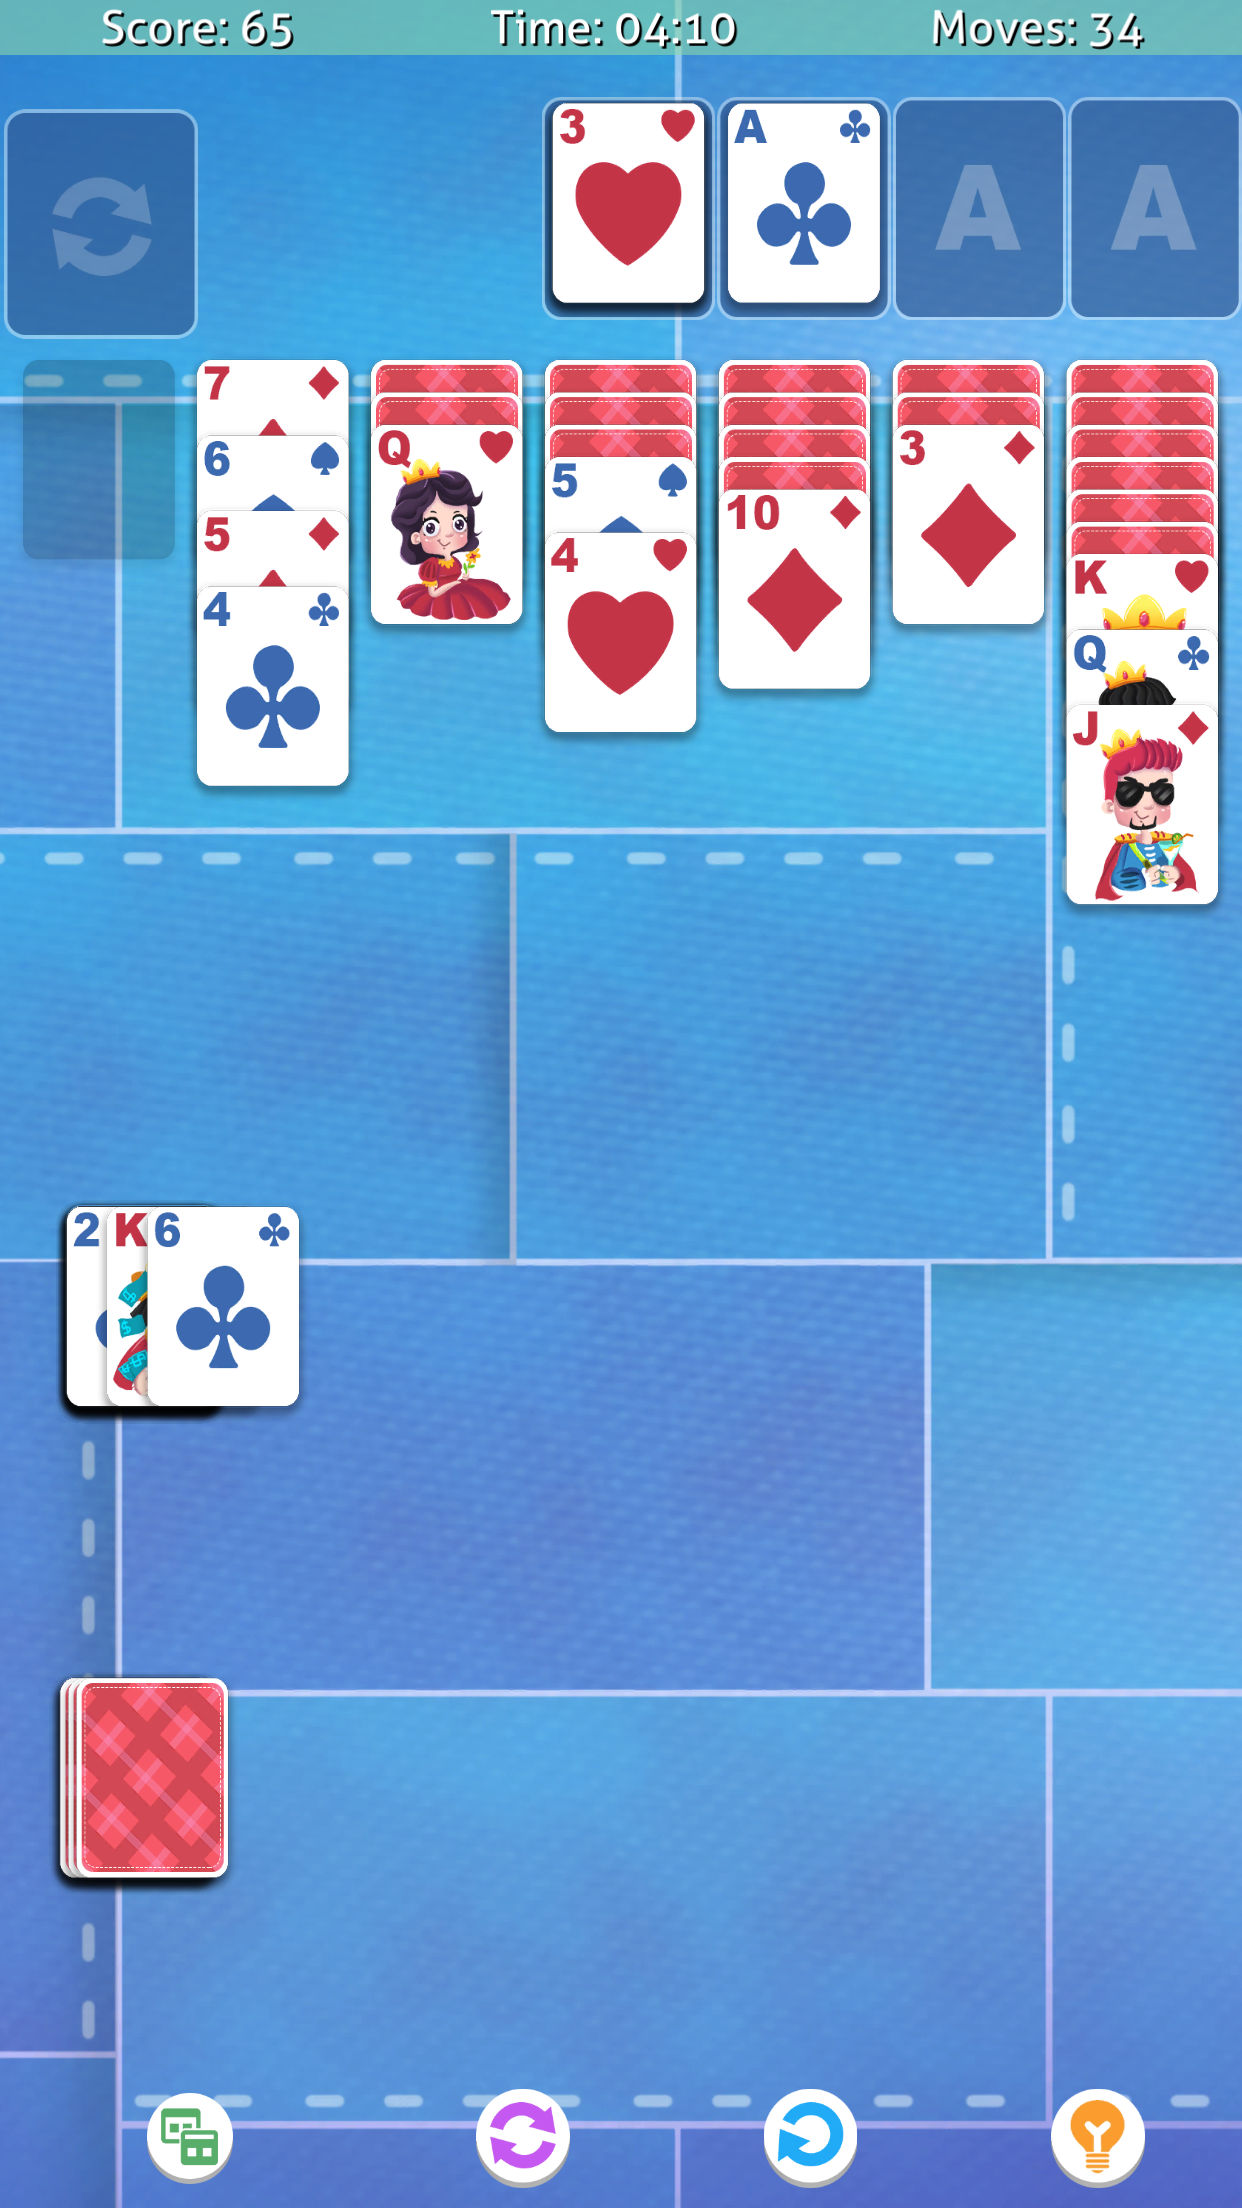 Solitaire #1 / Solitaire Kings Ultimate Game Apple AppStore - Google Play Store Image 1